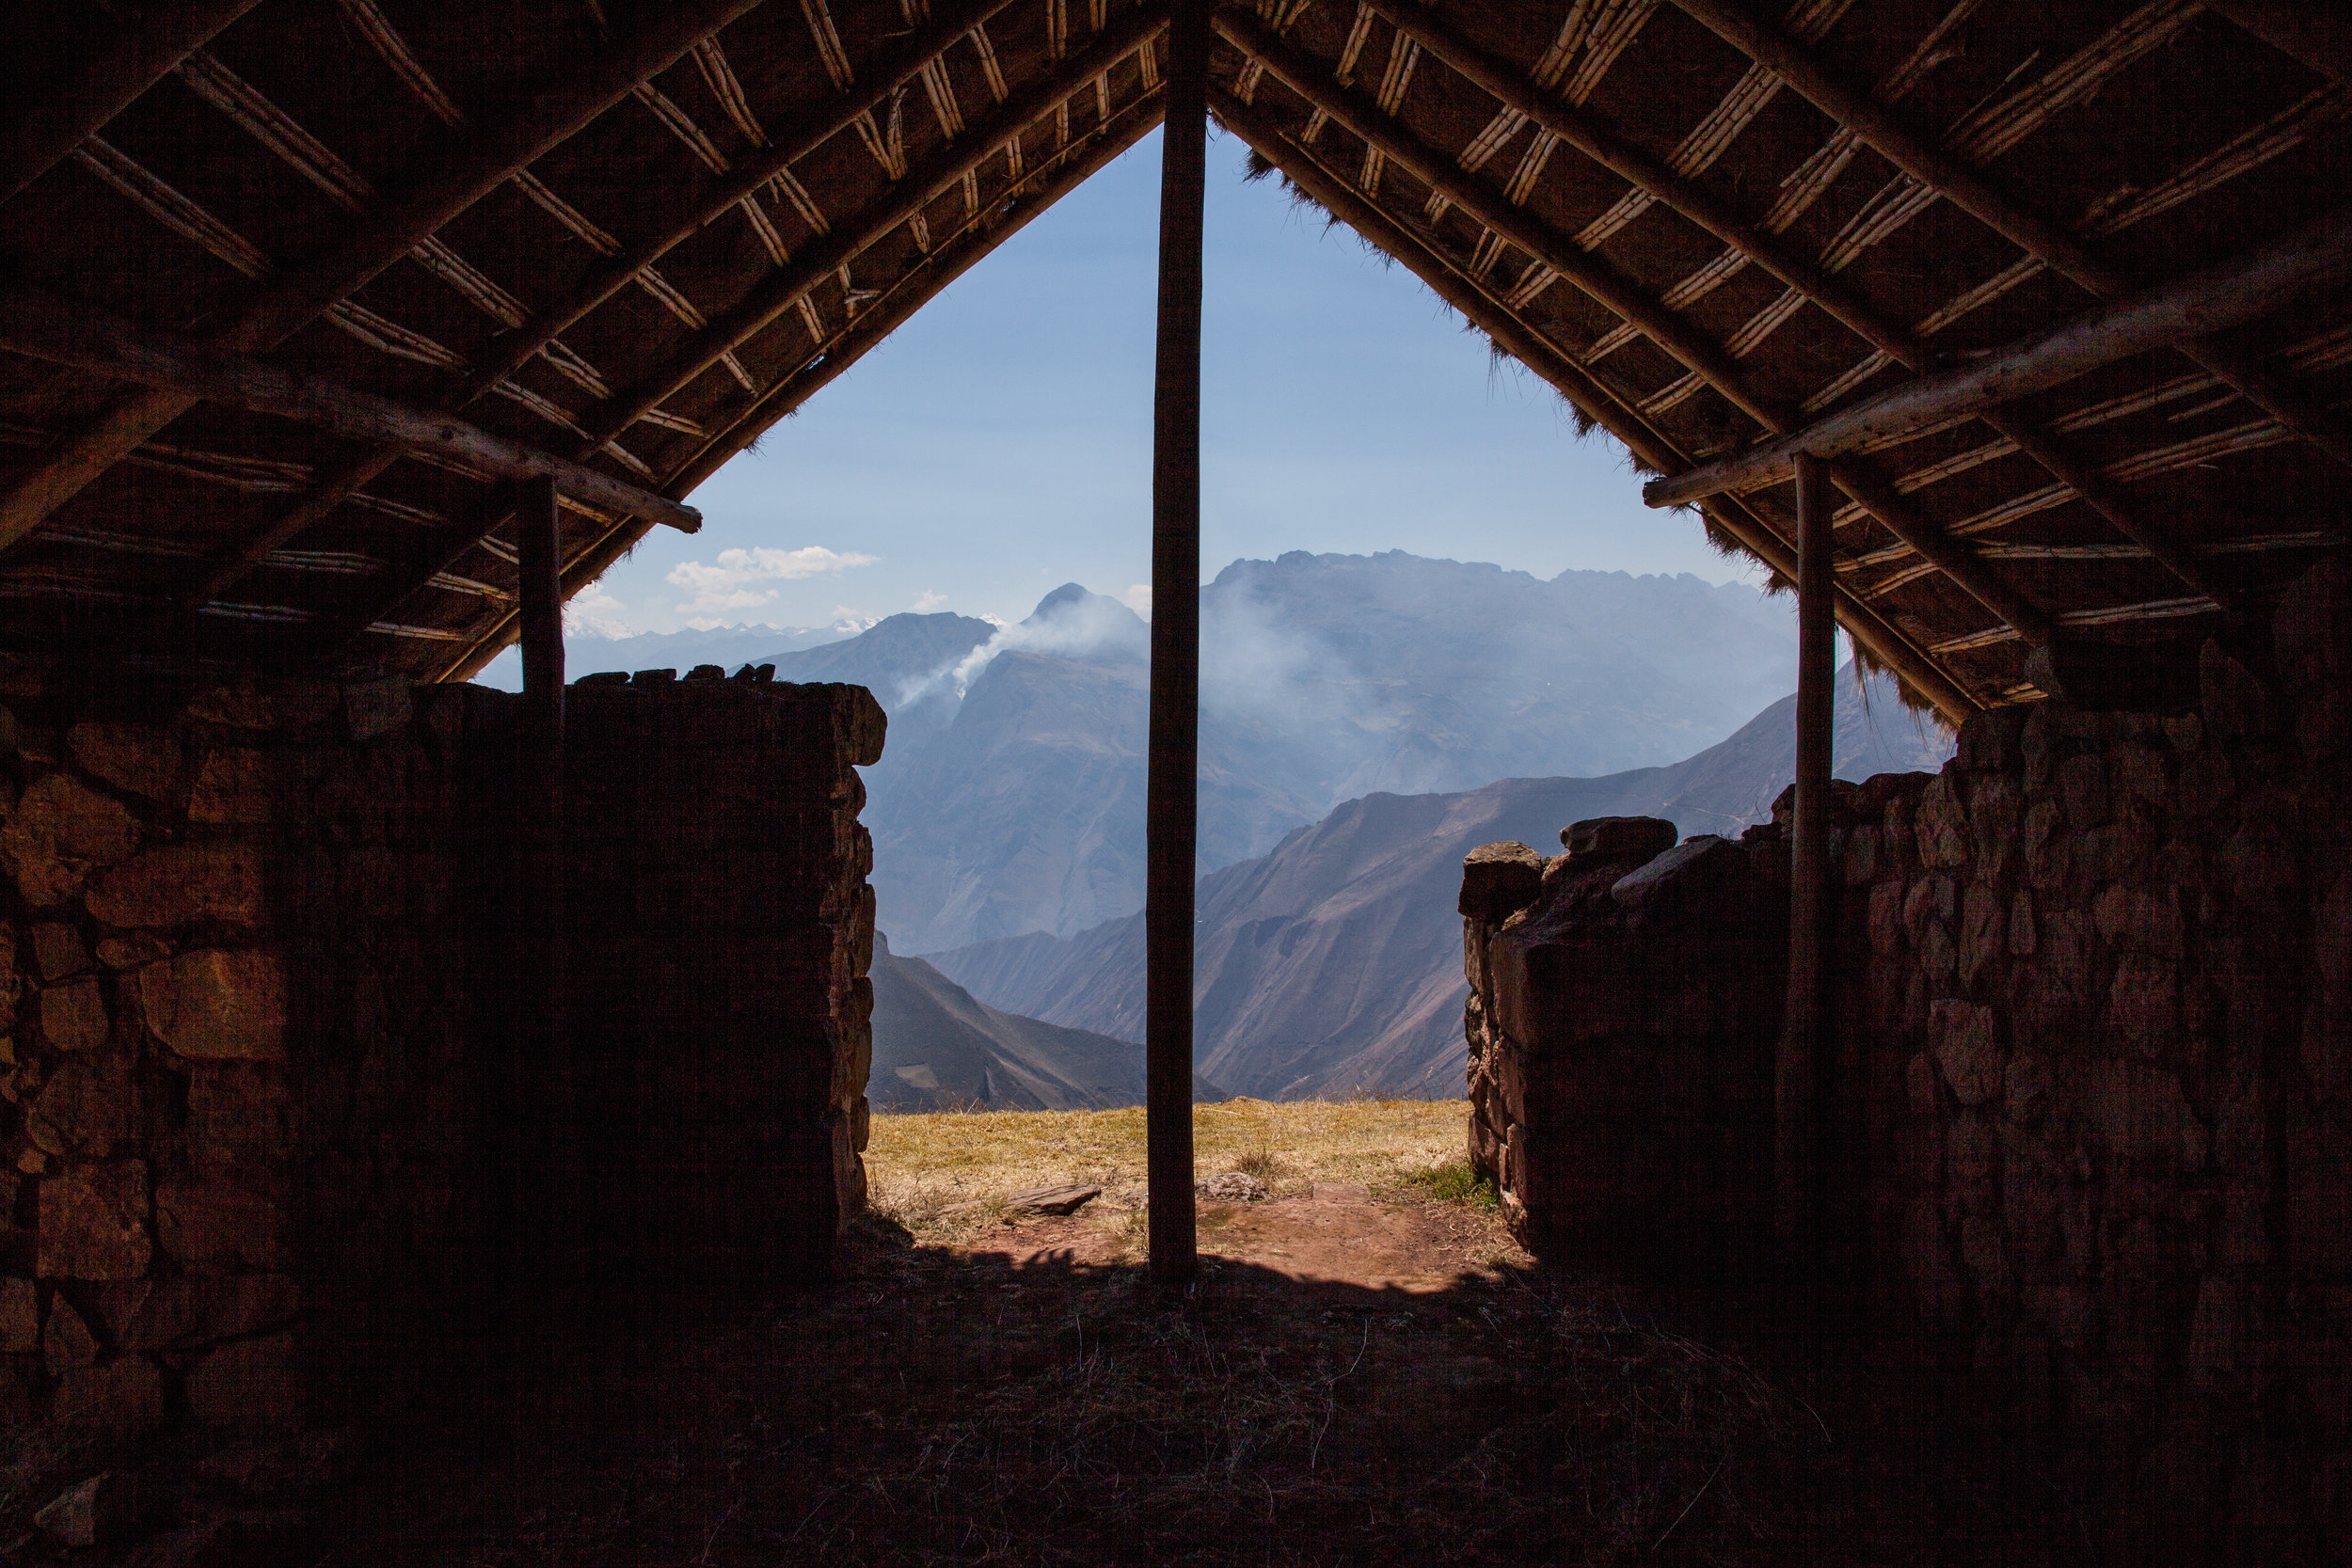 View from inside a hut on top of Sóndor in Peru.